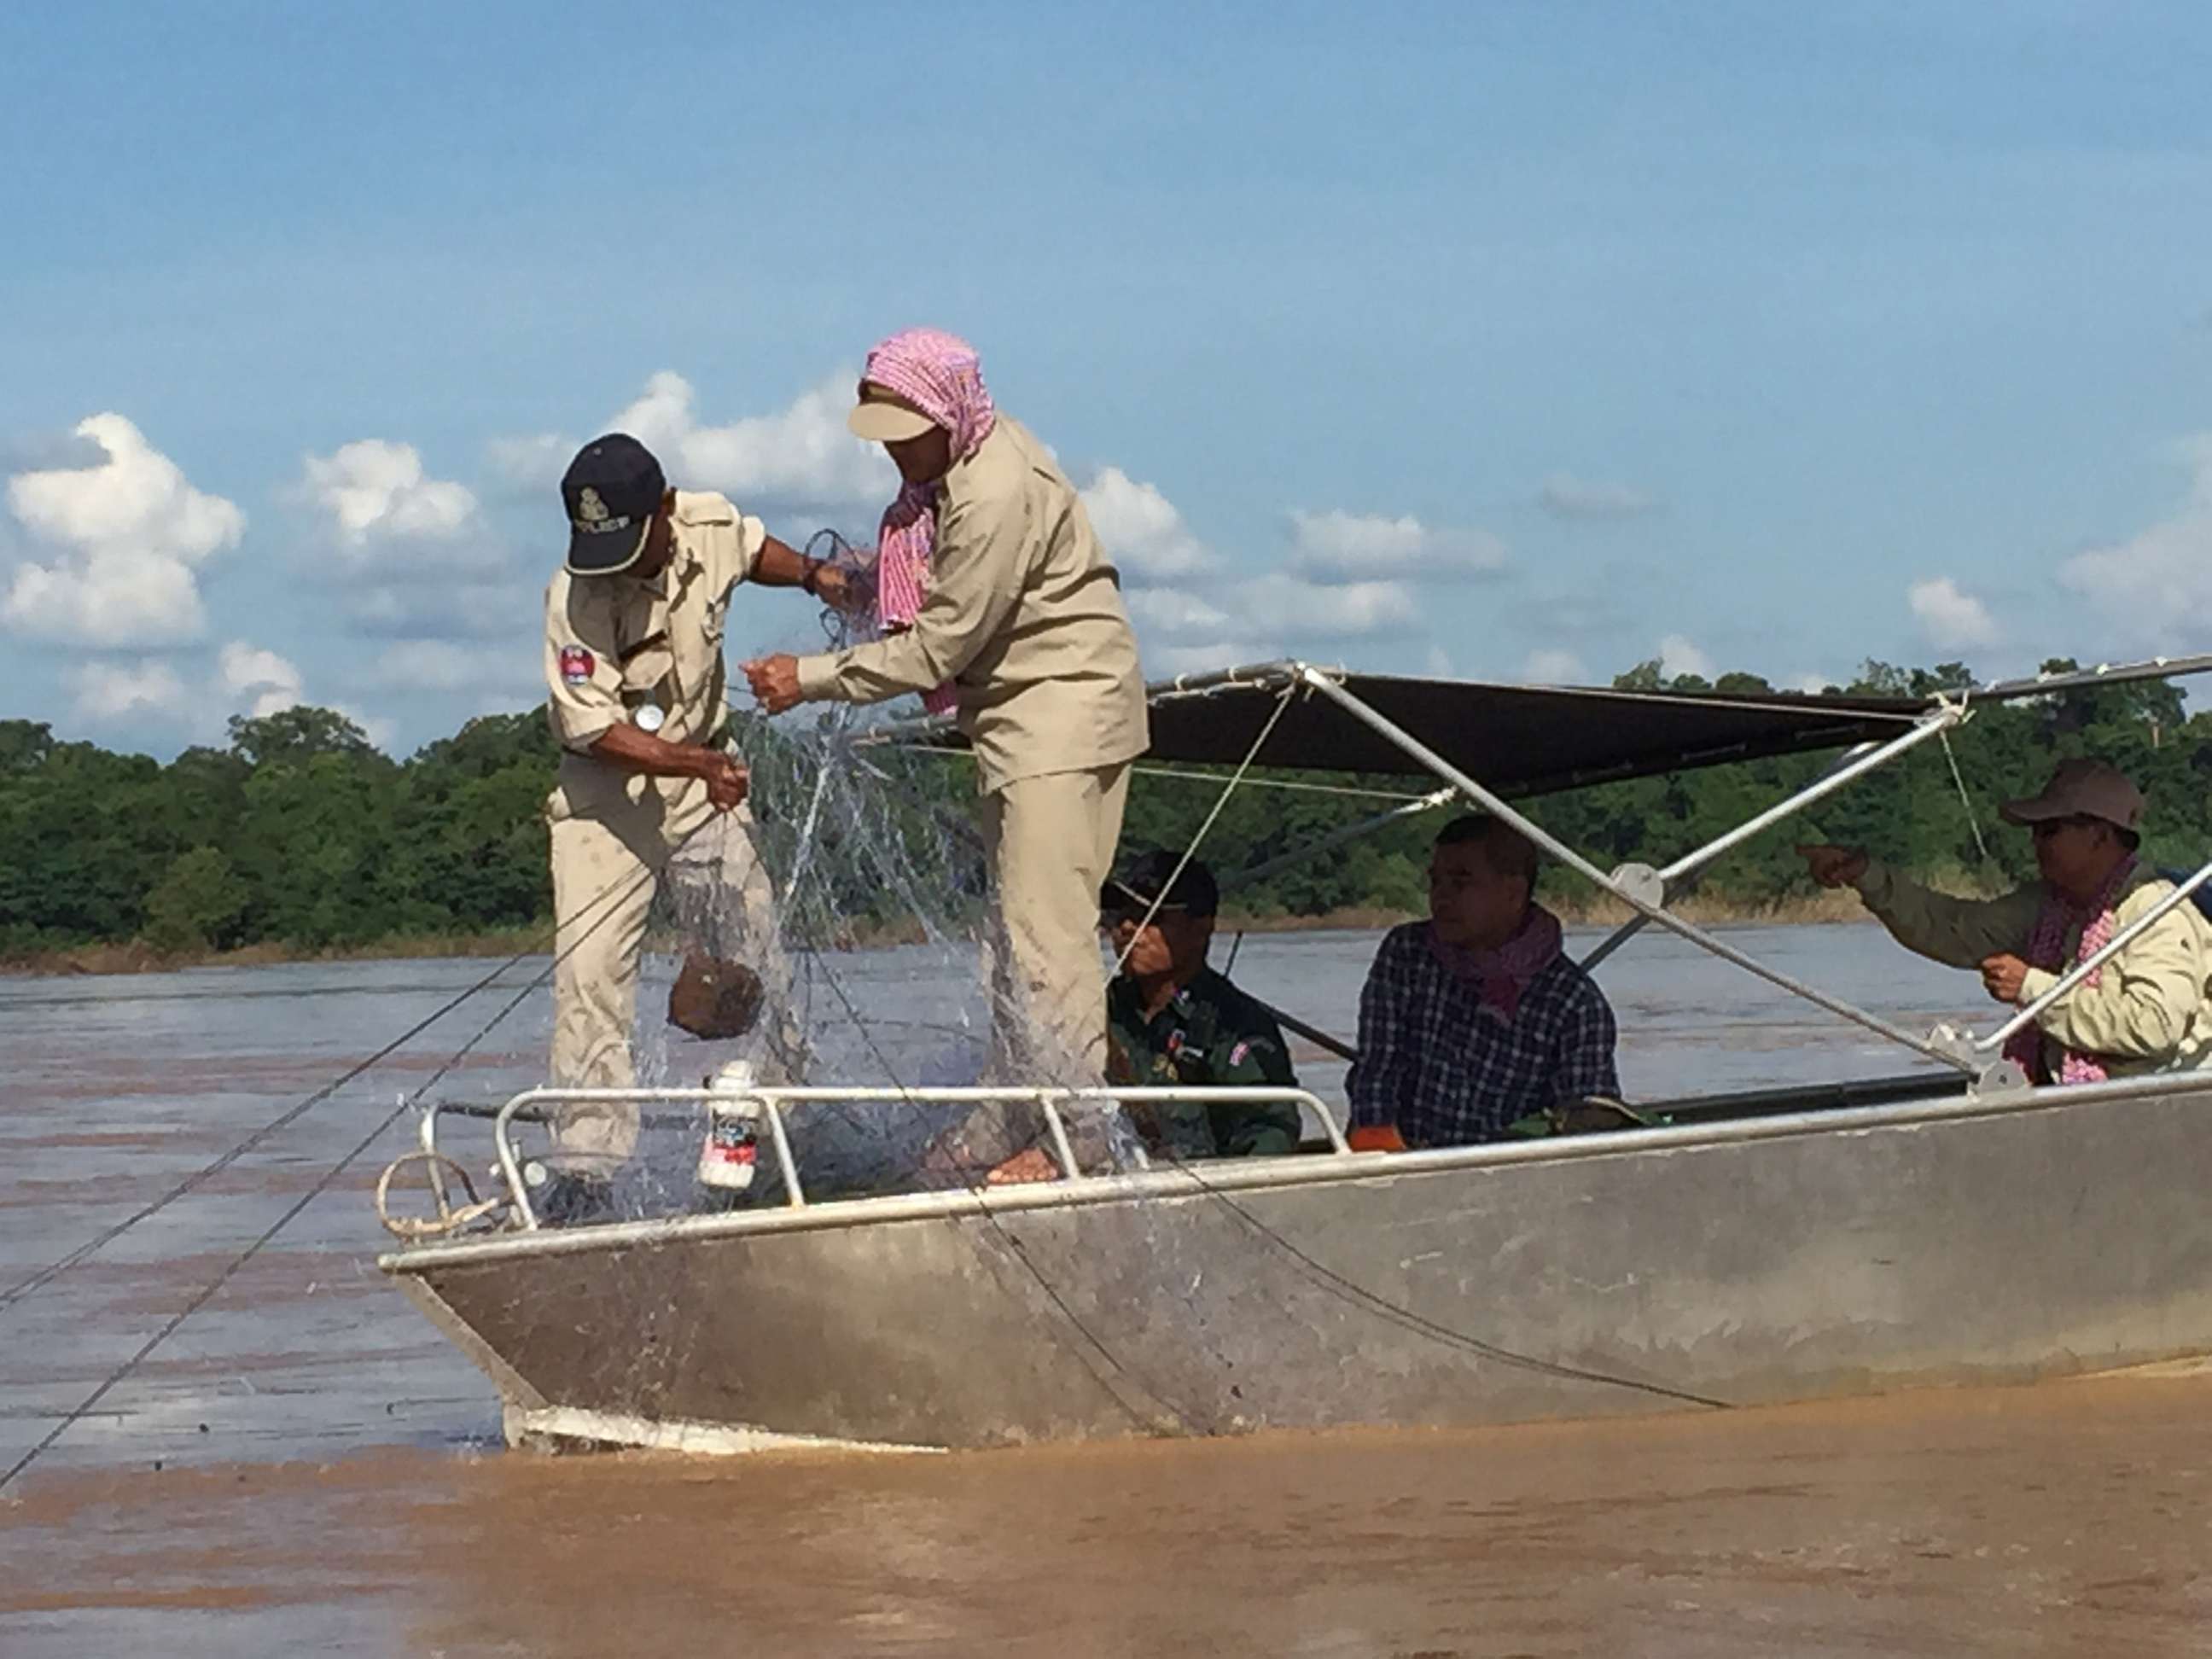 PHOTO: River guards confiscate illegal fishing nets along a protected area of the Mekong river in Cambodia where Irrawaddy river dolphins are critically endangered.